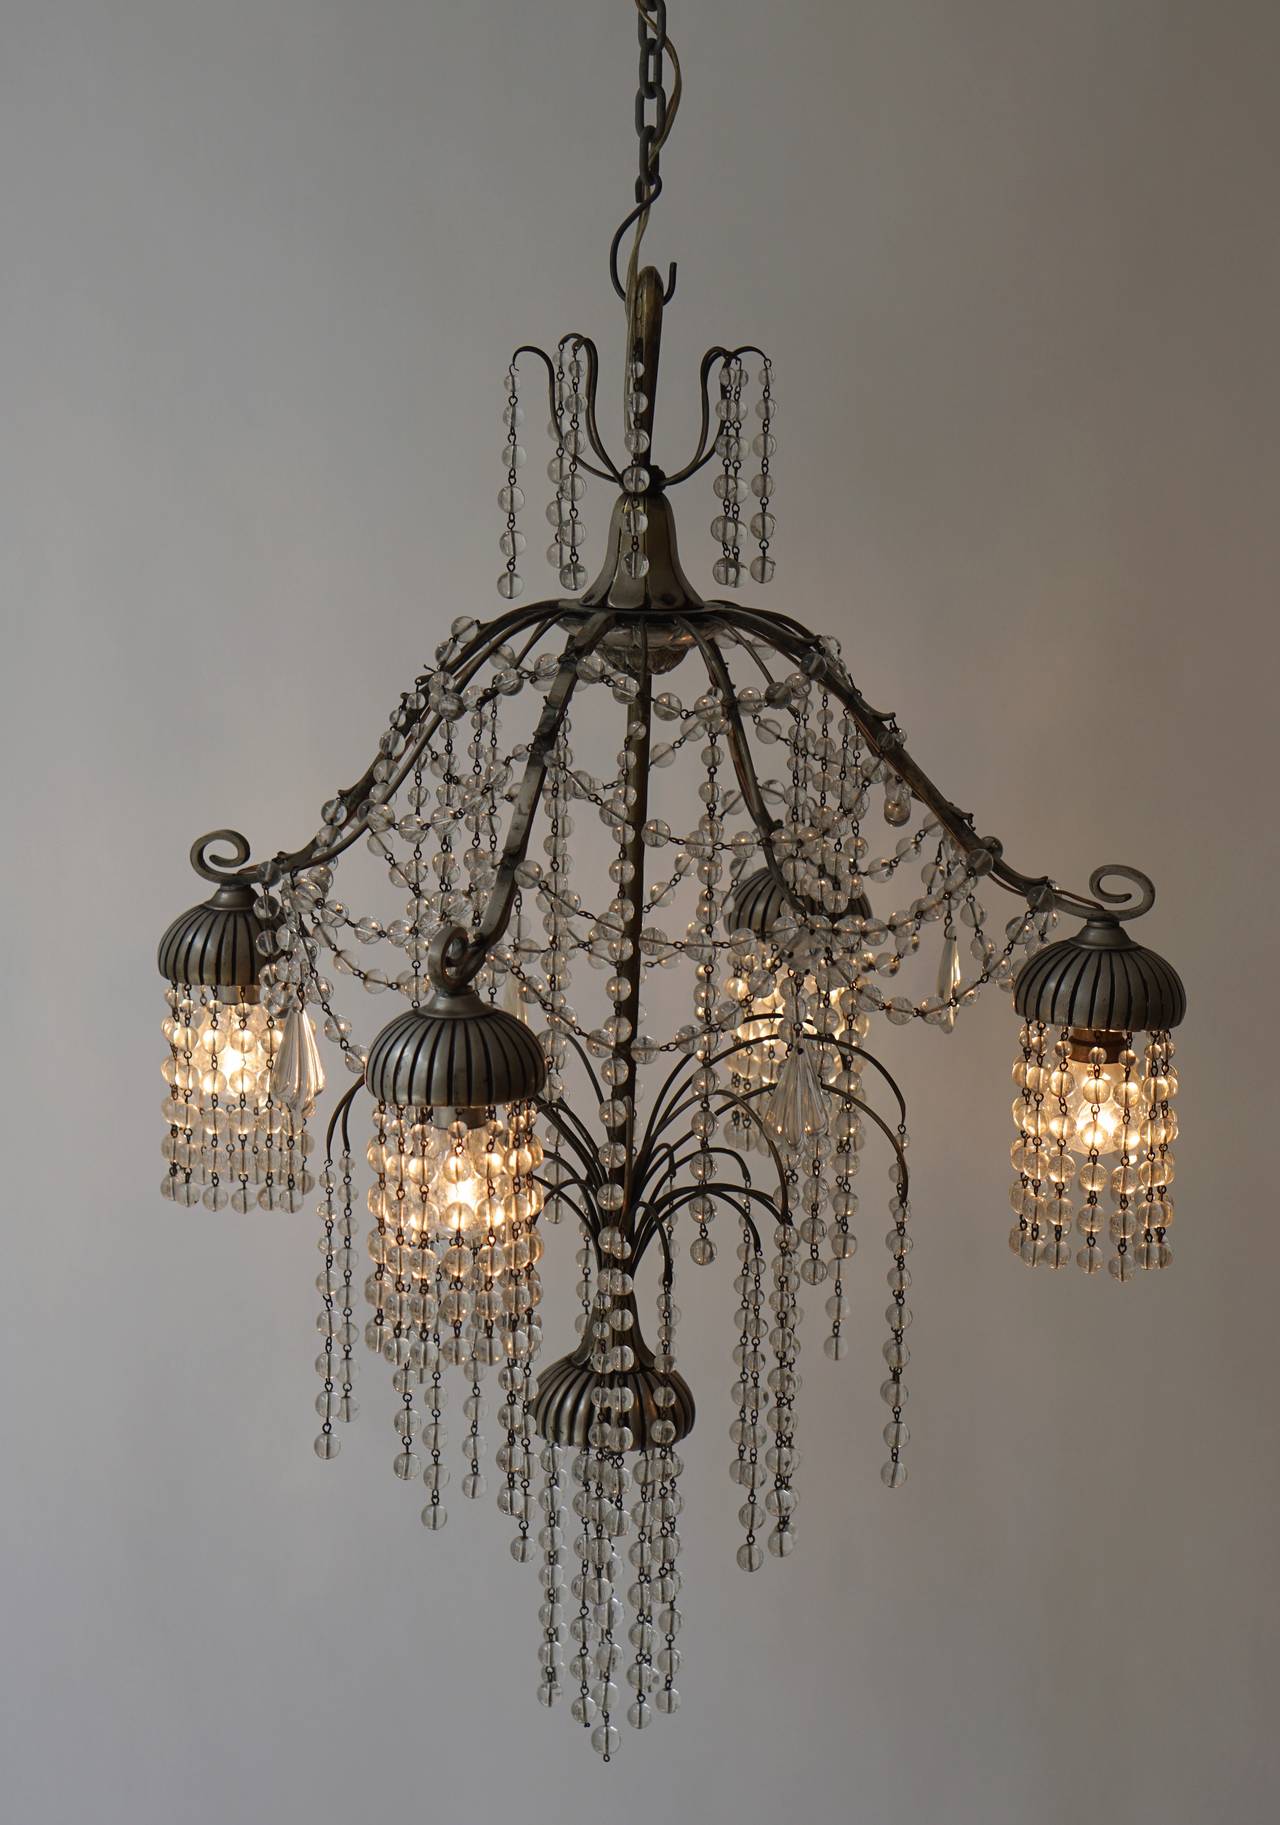 Absolutely beautiful 1930s chandelier.